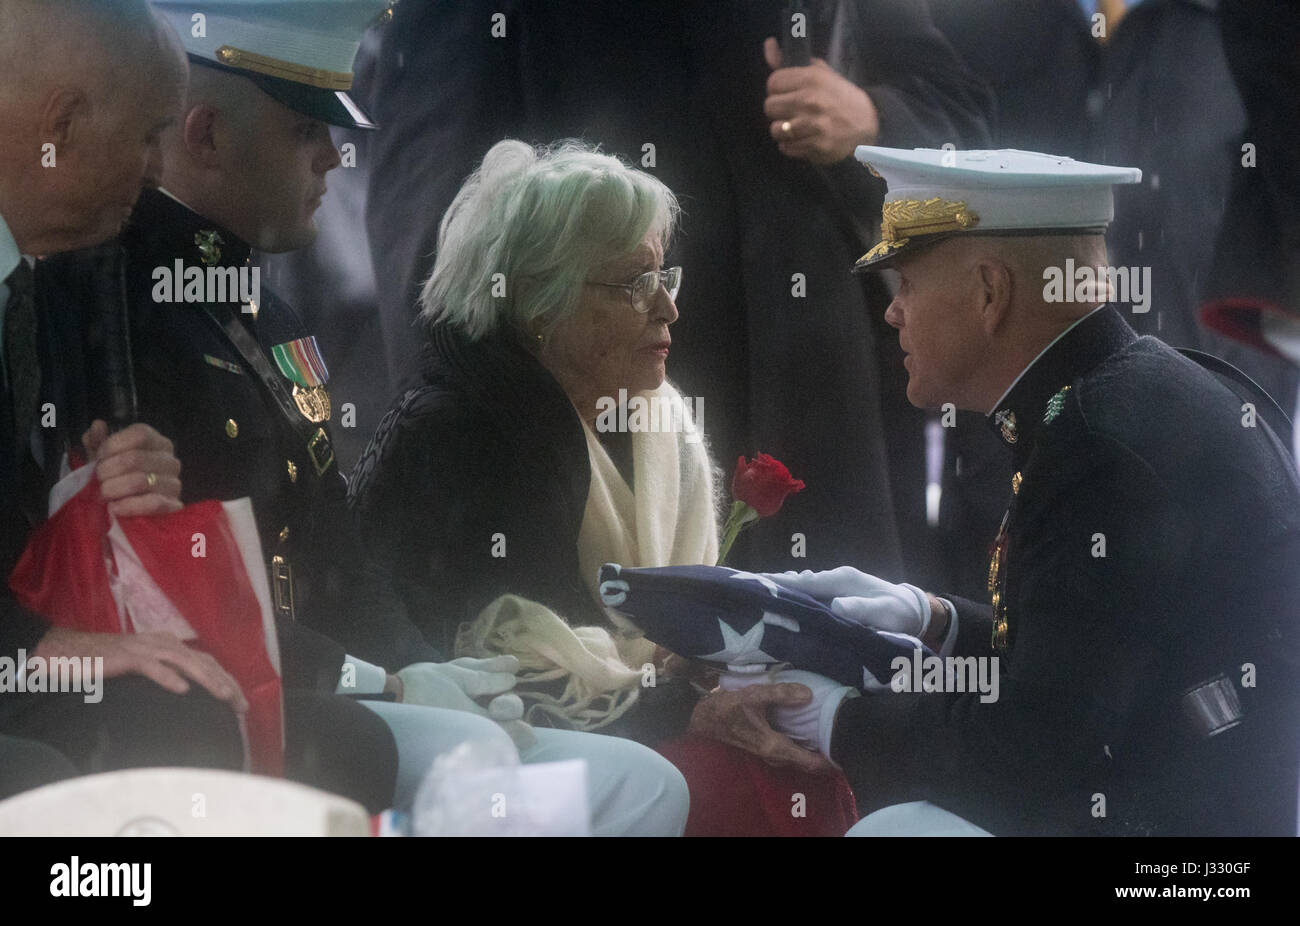 Annie Glenn, wife of former astronaut and U.S. Senator John Glenn receives the folded American flag from Commandant of the U.S. Marine Corps, General Robert B. Neller, during a graveside interment ceremony at Arlington National Cemetery in Virginia on Thursday, April 6, 2017, the day on which Glenn and Annie were married in 1943. He was the first American to orbit Earth on Feb. 20, 1962, in a five-hour flight aboard the Friendship 7 spacecraft. In 1998, Glenn broke another record by returning to space at the age of 77 on the Space Shuttle Discovery. Photo Credit: (NASA/Aubrey Gemignani) Stock Photo